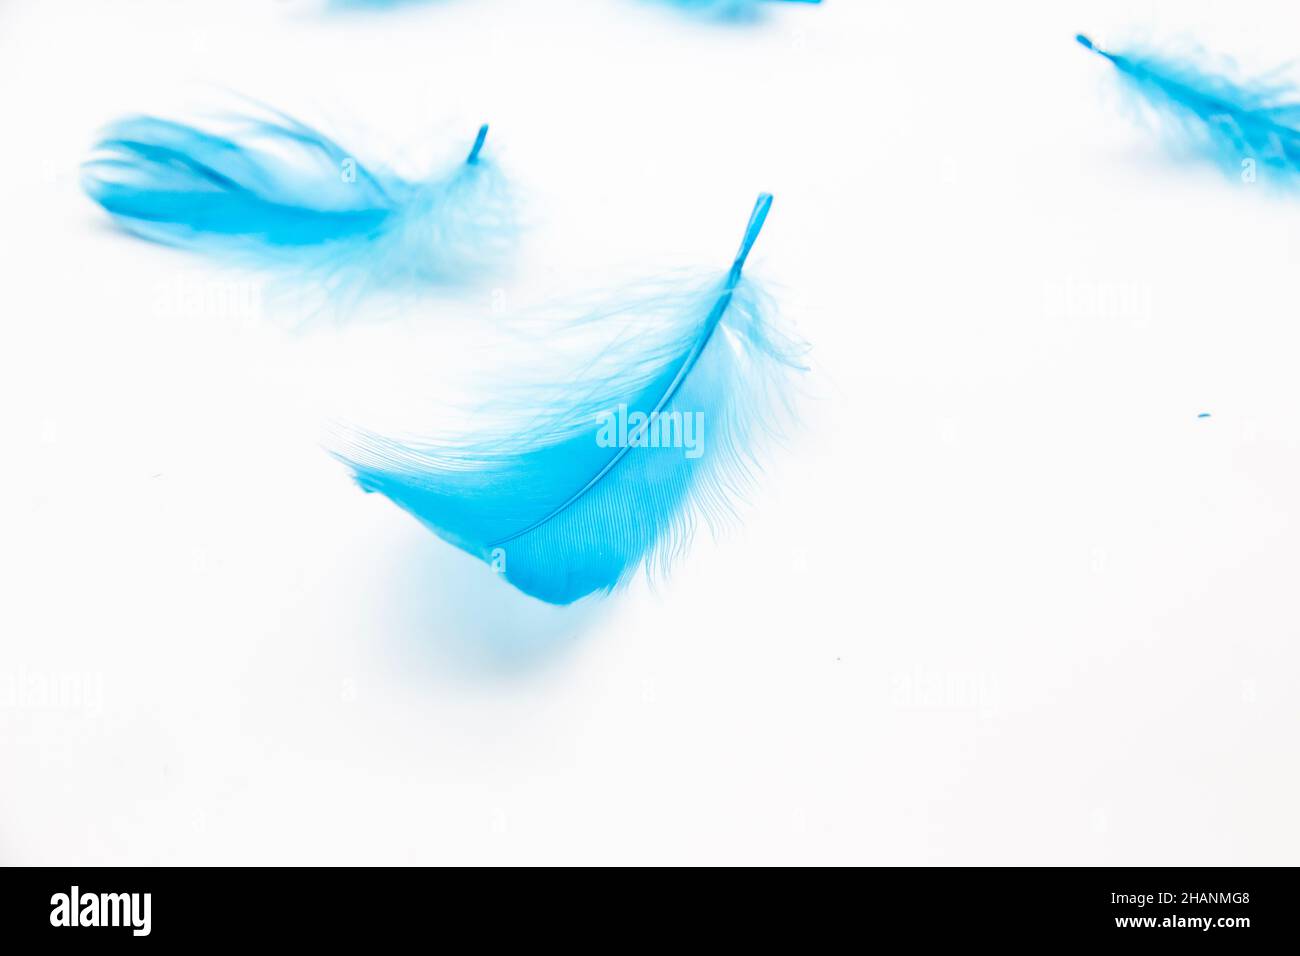 Blue fluffy bird feathers on a white background. A texture of a soft feathers. Stock Photo